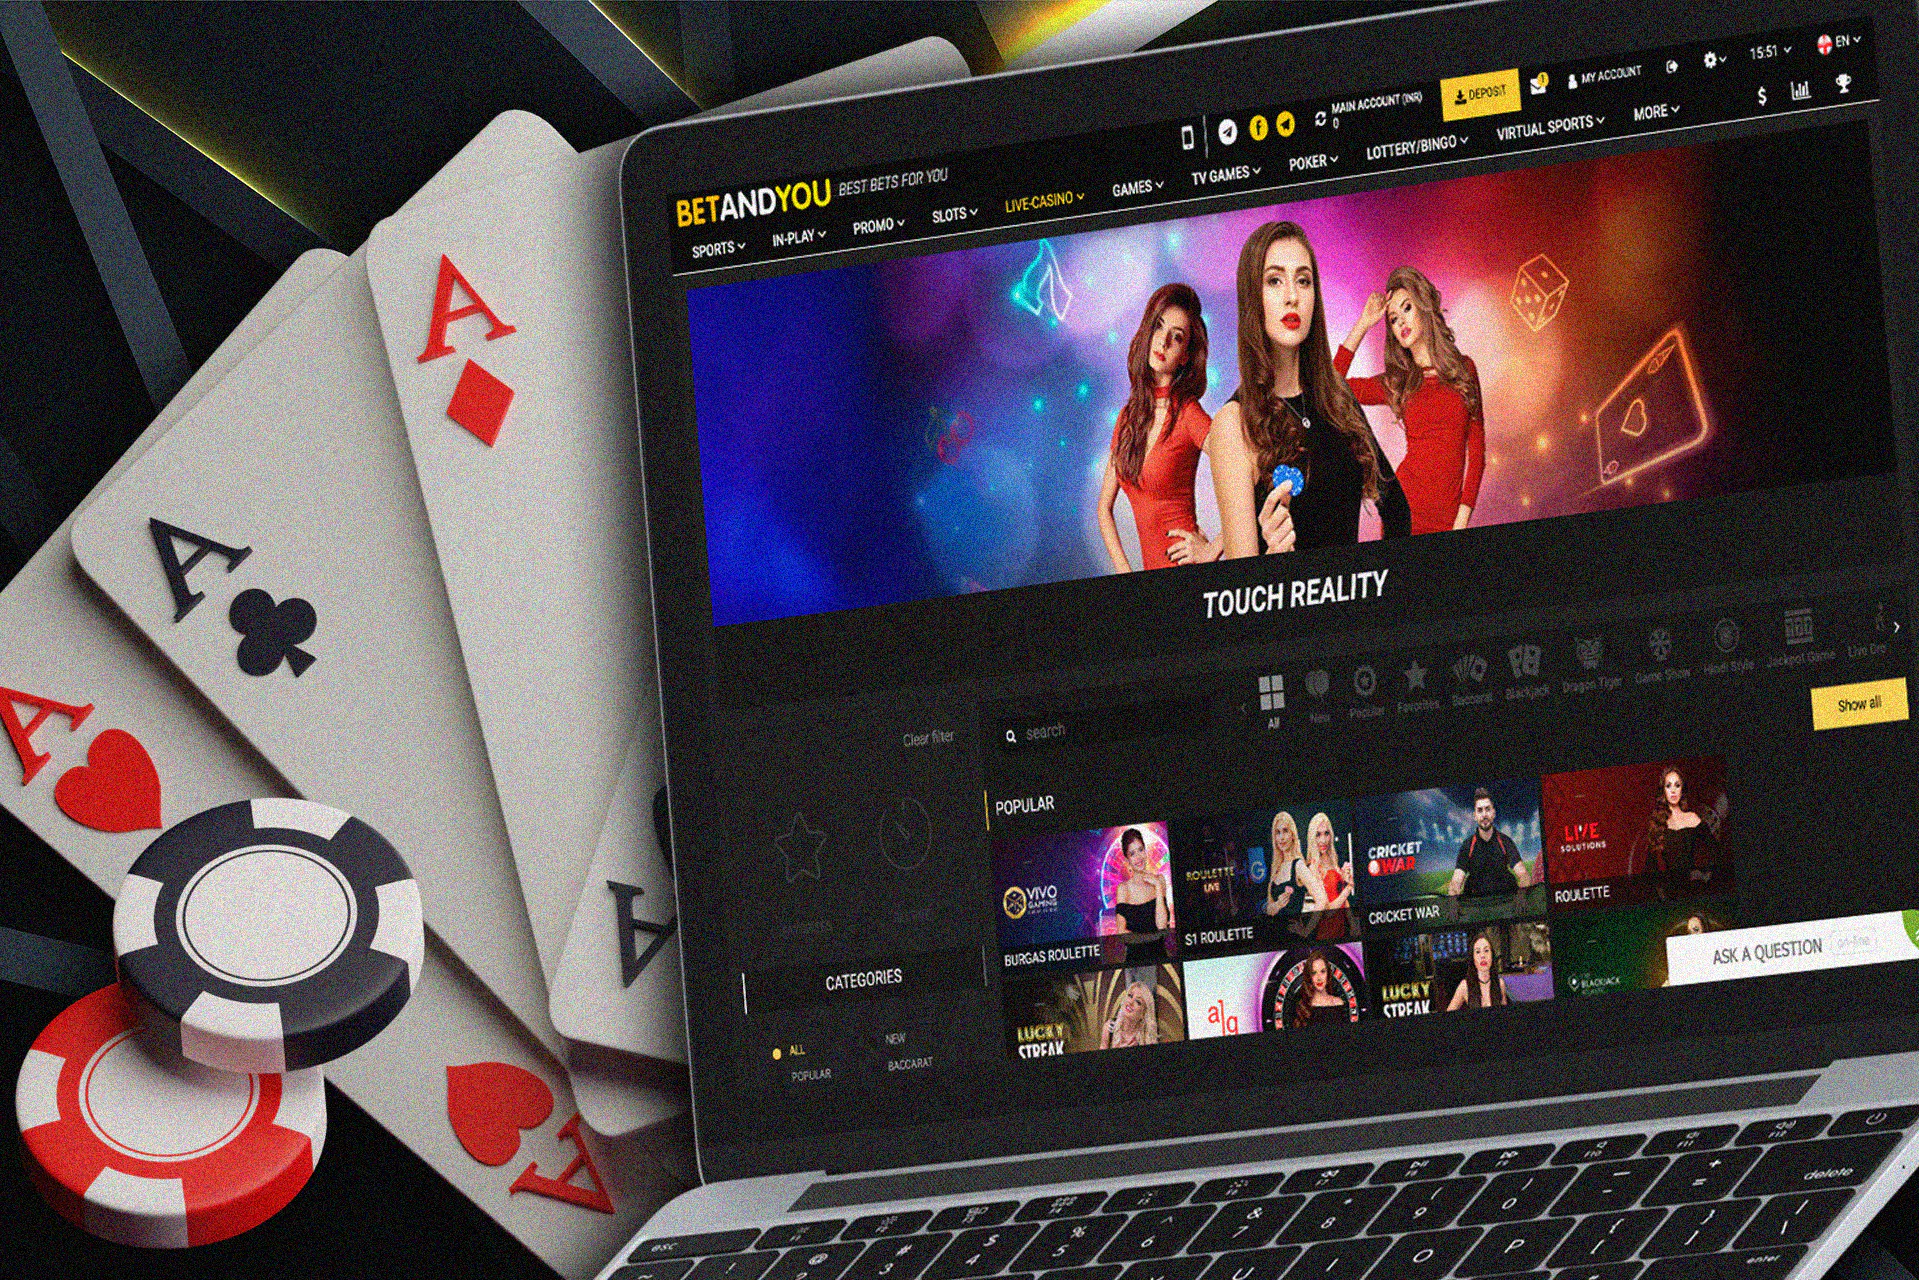 Play casino games against the live dealers at Betandyou.